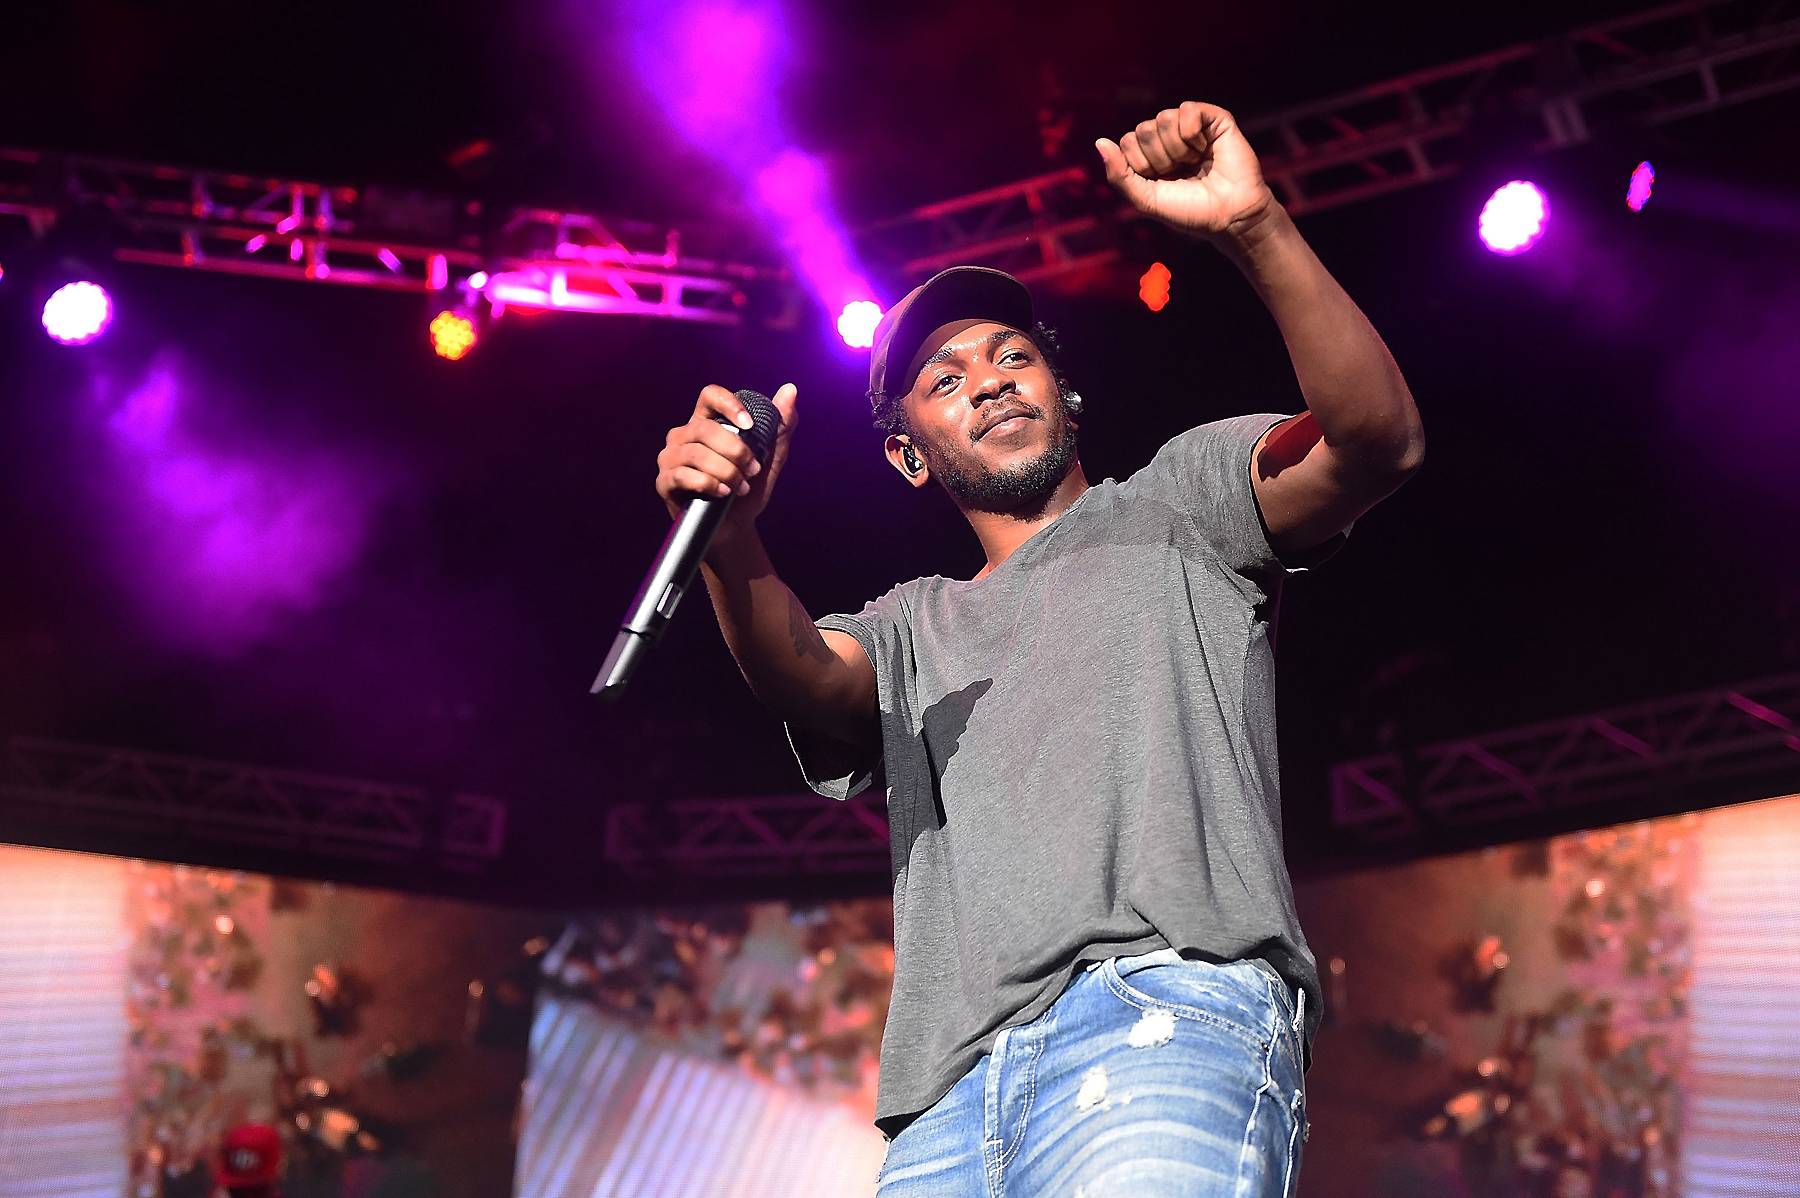 Put a Ring on It - There's nothing like success with the love of your life by your side. On April 2015, Kendrick announced his engagement to his high school sweetheart, Whitney Alford.(Photo: Paras Griffin/Getty Images)